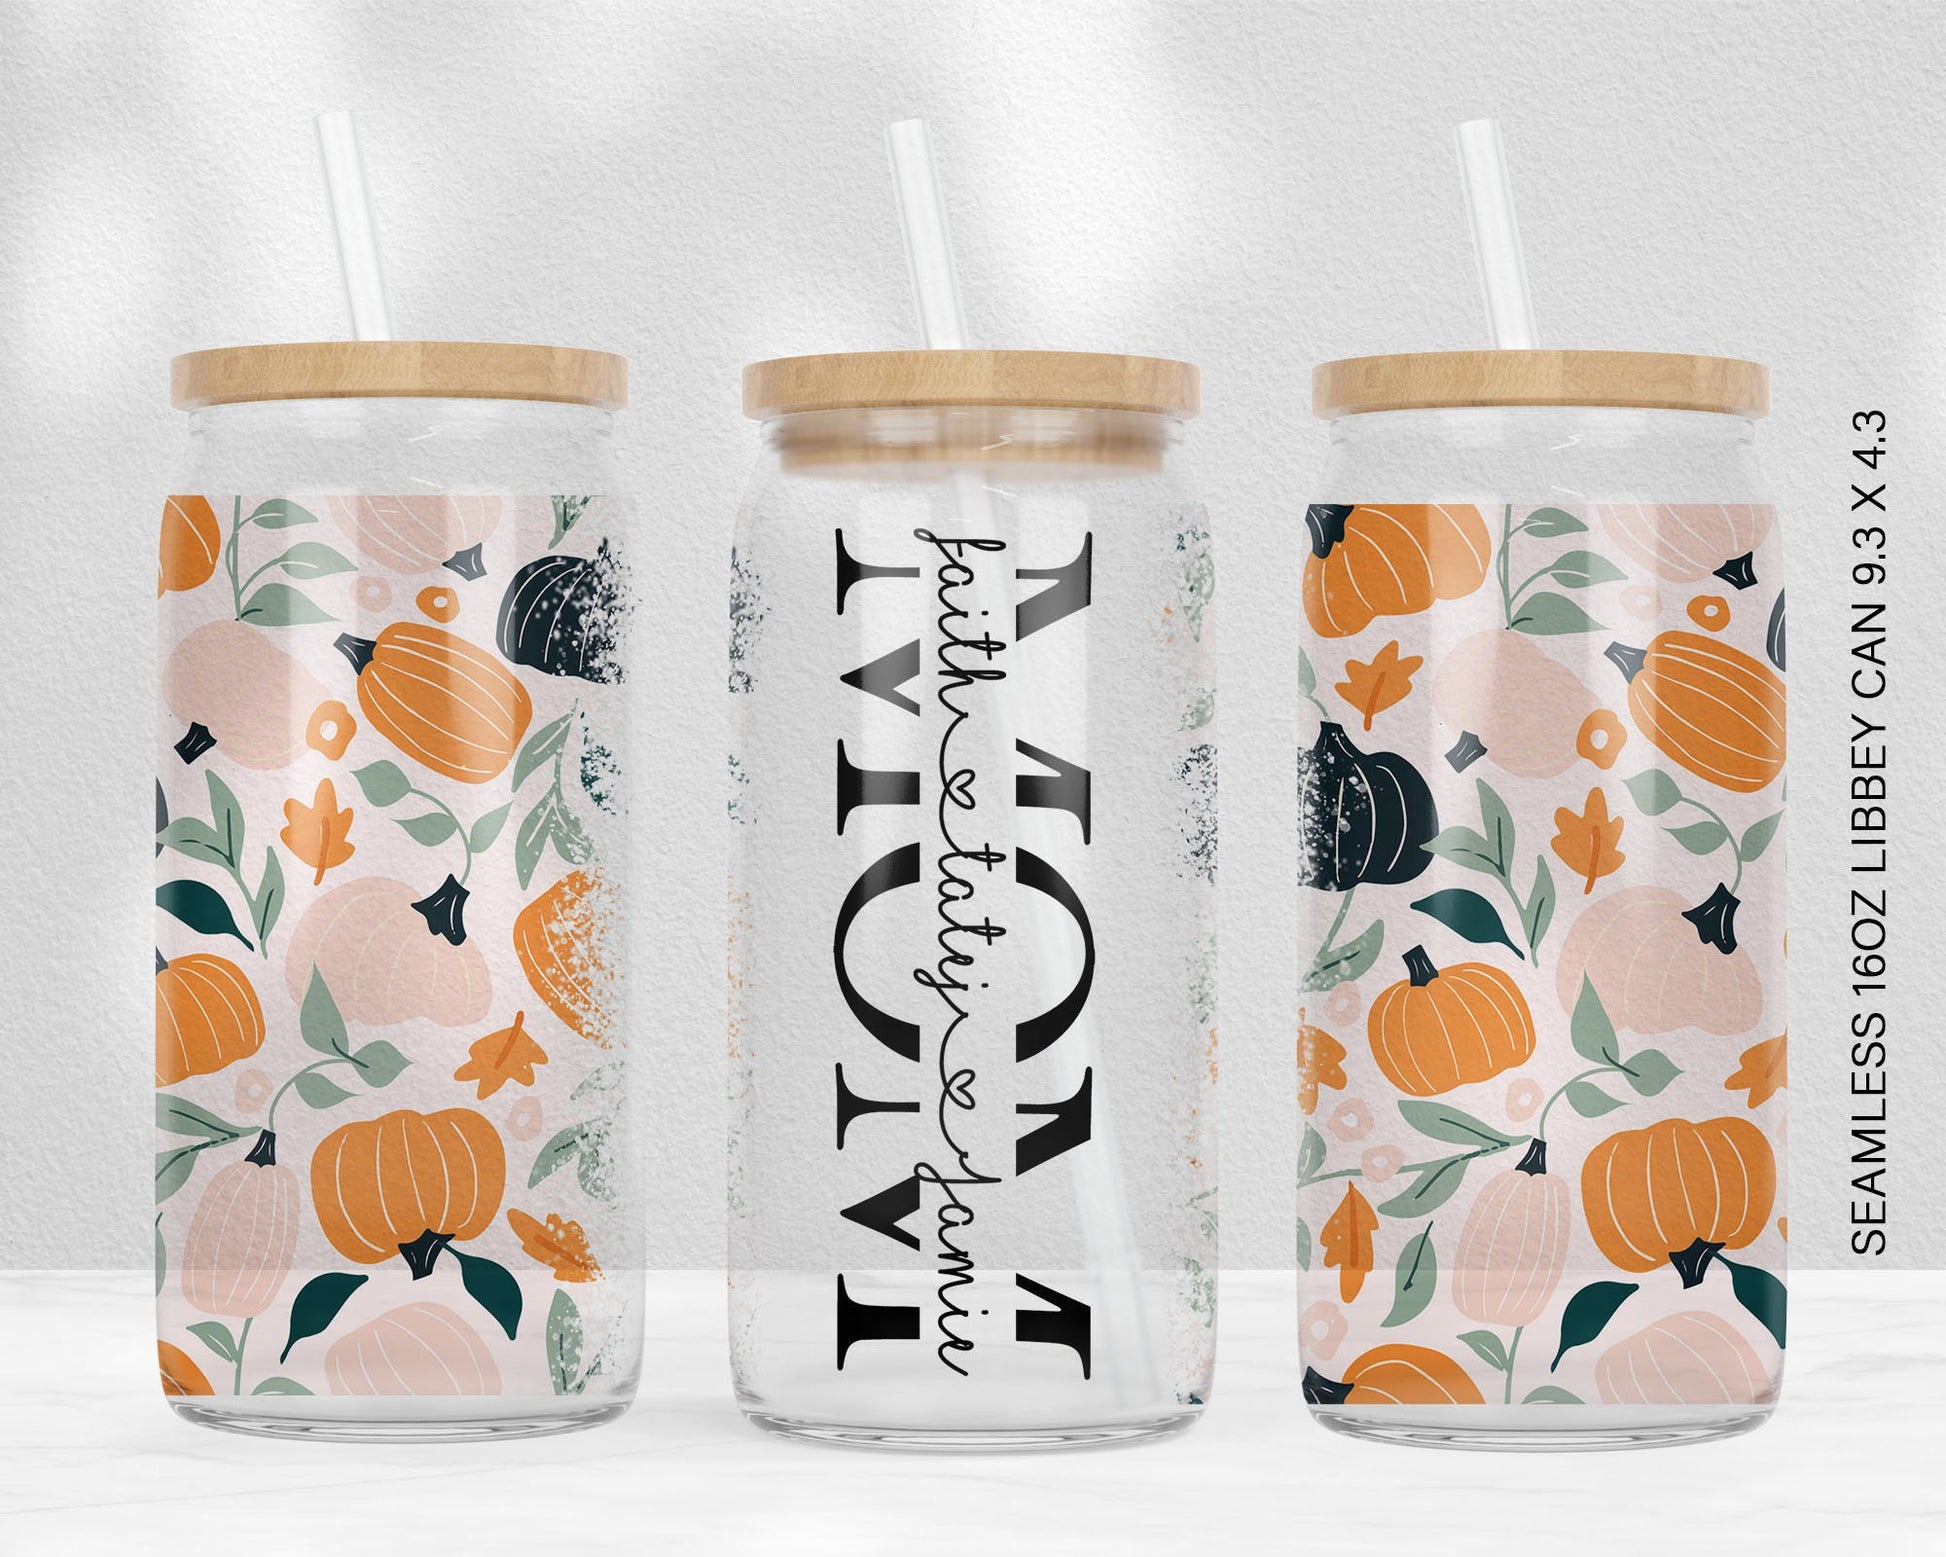 16 Oz Libbey Glass Can Mockup for Canva Graphic by sublimation